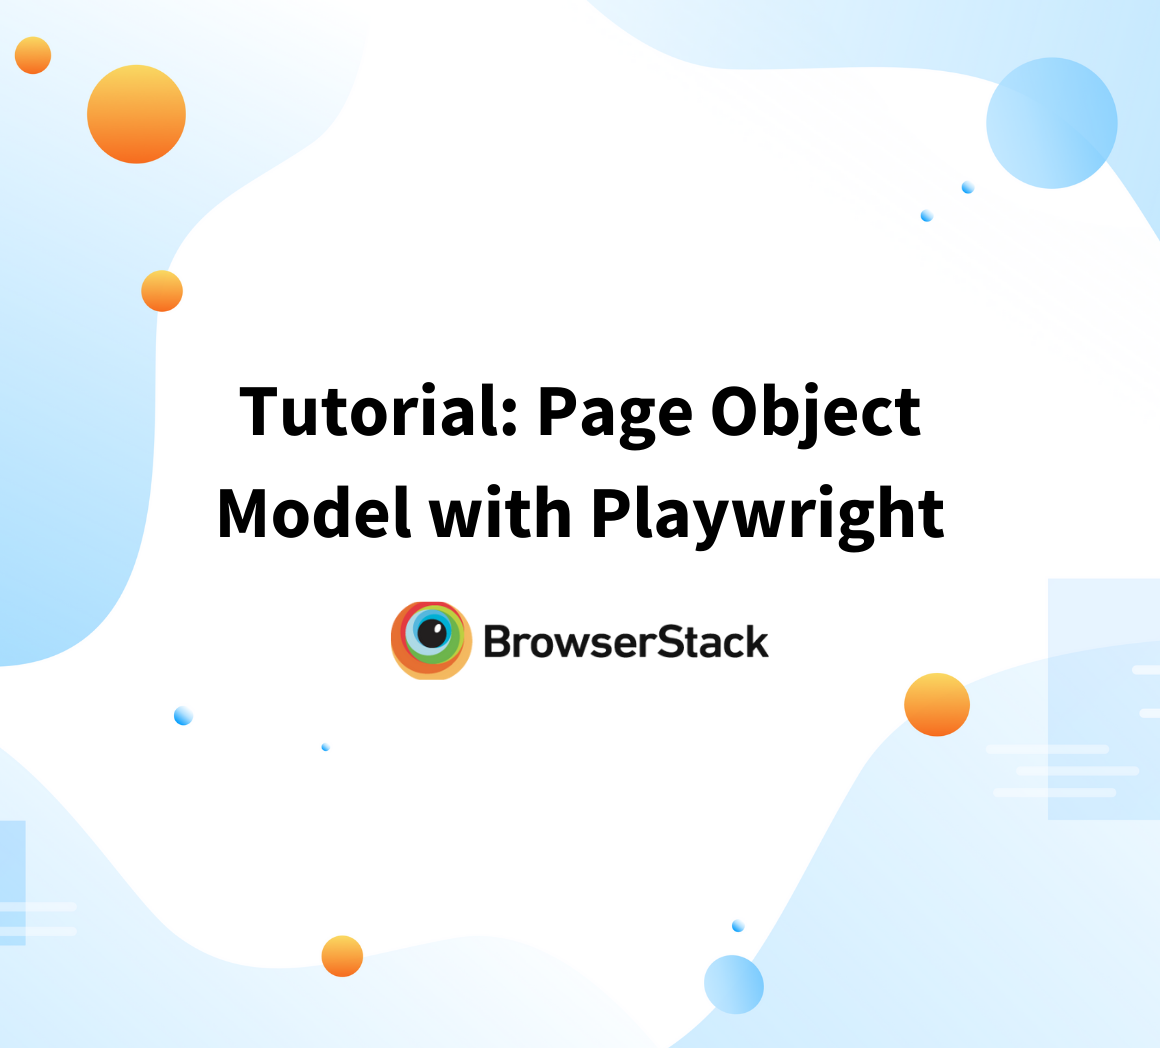 Tutorial: Page Object Model with Playwright